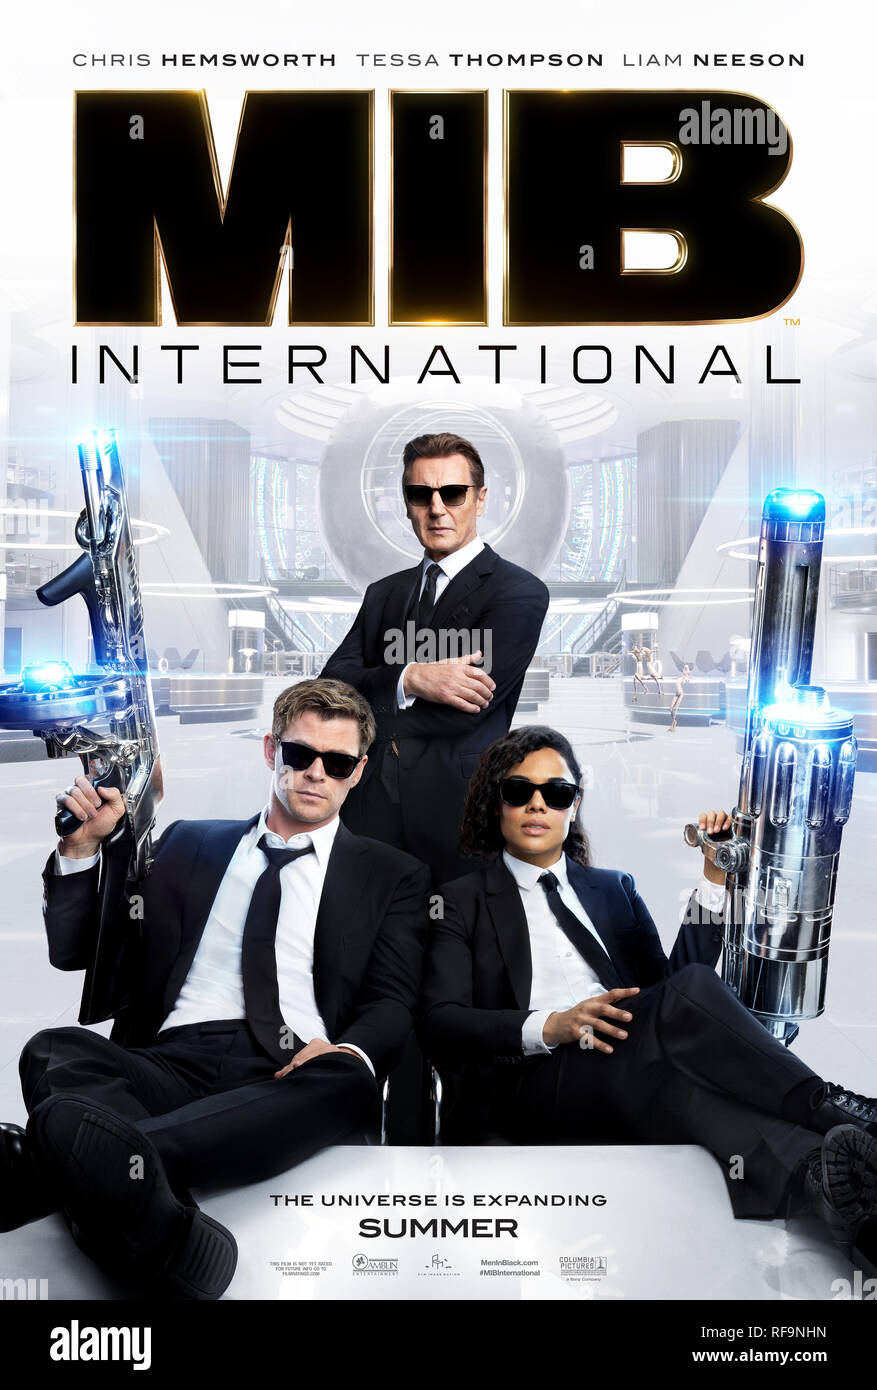 RELEASE DATE: June 19, 2019 TITLE: Men in Black: International STUDIO: Columbia Pictures DIRECTOR: F. Gary Gray PLOT: The Men in Black have always protected the Earth from the scum of the universe. In this new adventure, they tackle their biggest threat to date: a mole in the Men in Black organization. STARRING: LIAM NEESON as T, TESSA THOMPSON as Em, CHRIS HEMSWORTH as H poster art. (Credit Image: © Columbia Pictures/Entertainment Pictures) Stock Photo